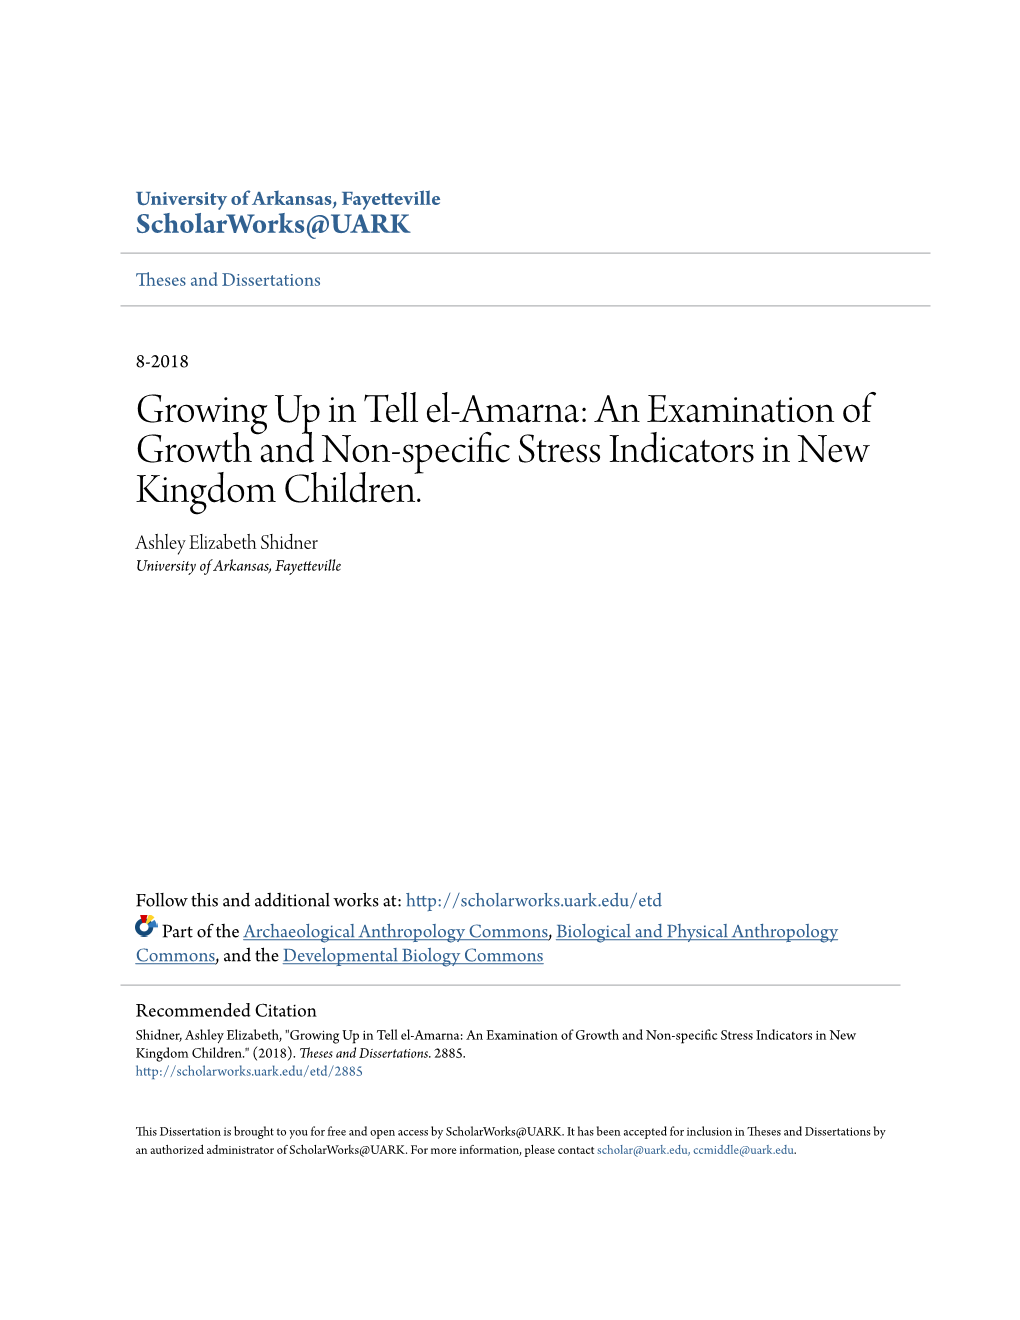 Growing up in Tell El-Amarna: an Examination of Growth and Non-Specific Trs Ess Indicators in New Kingdom Children